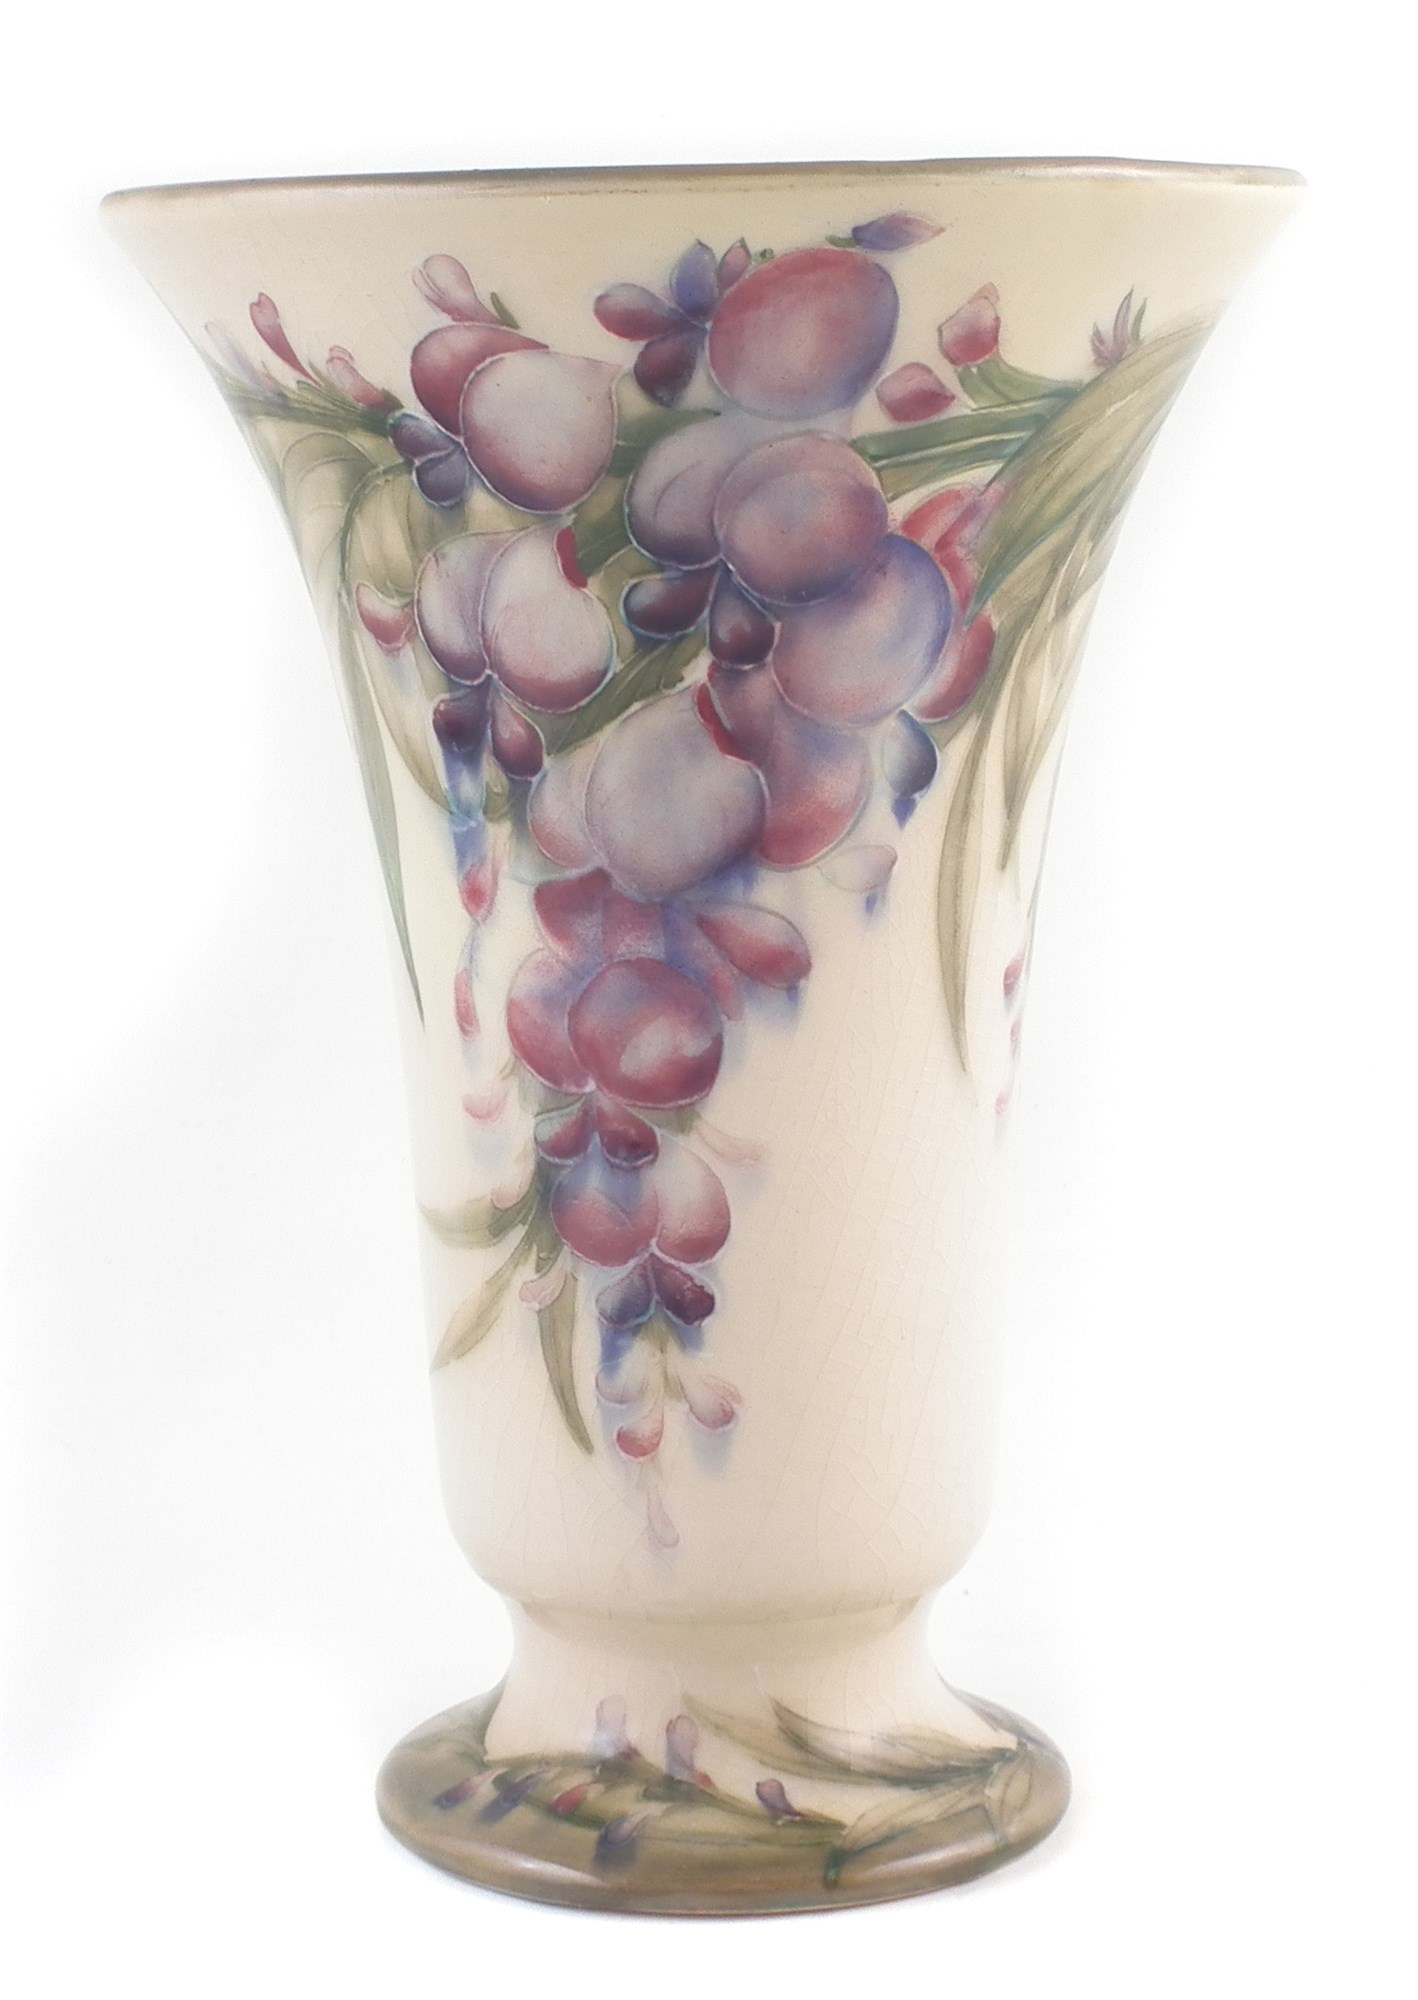 Moorcroft wisteria pattern vase , decorated on a cream coloured back ground with green borders, 22cm